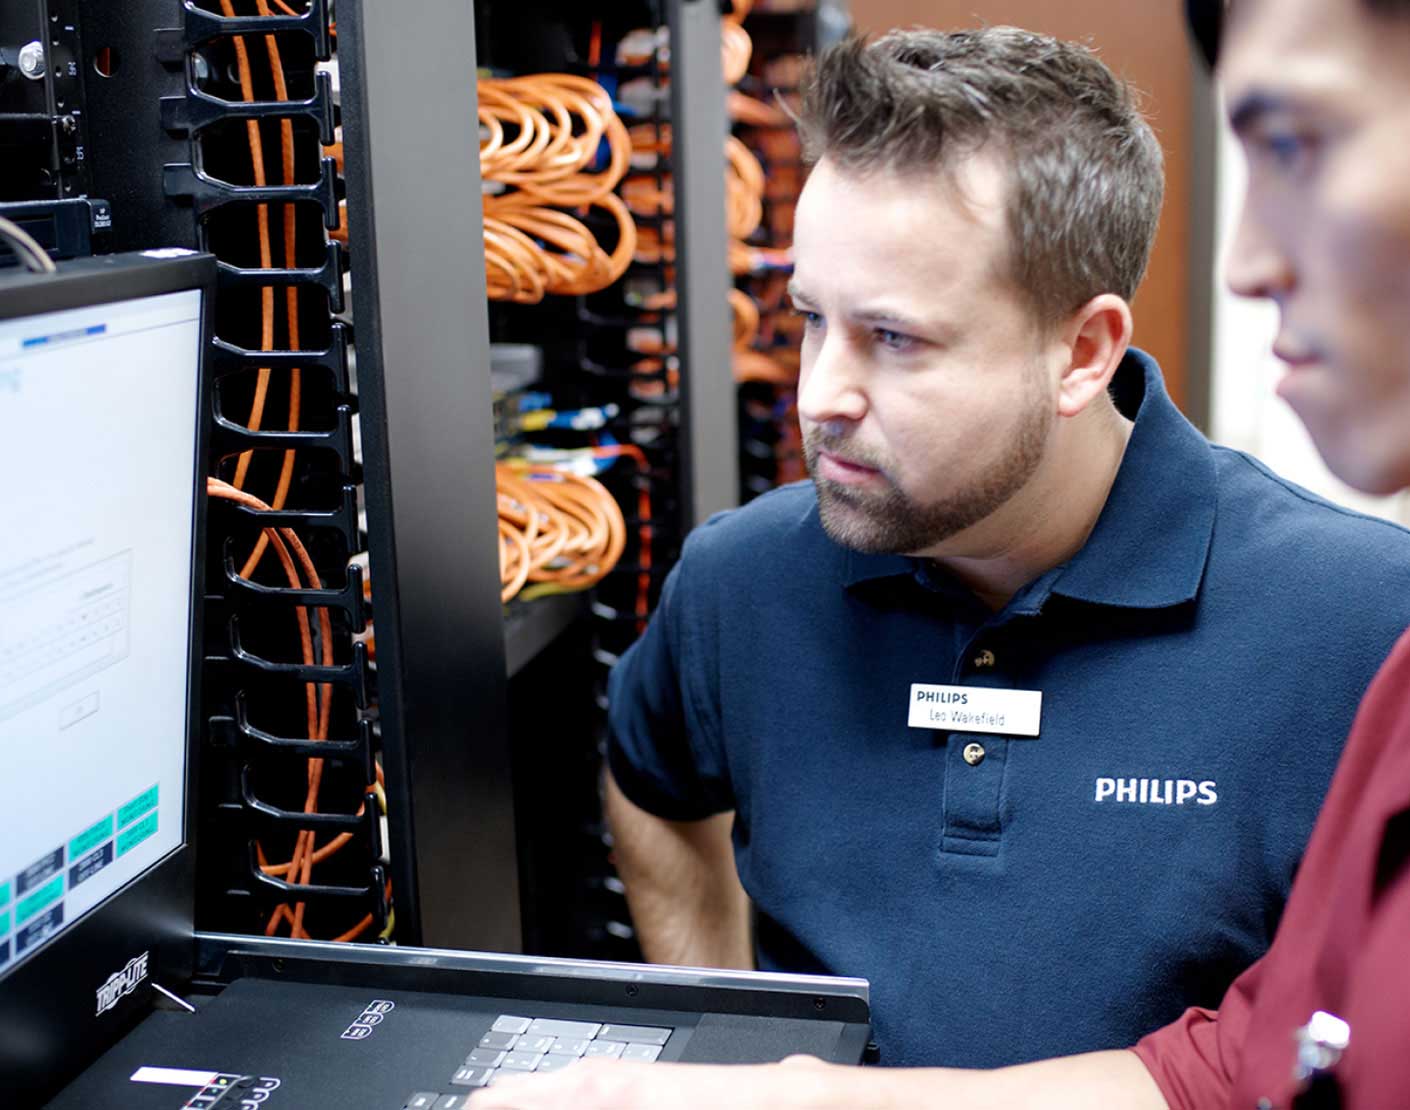 Two men look at a screen in a server room